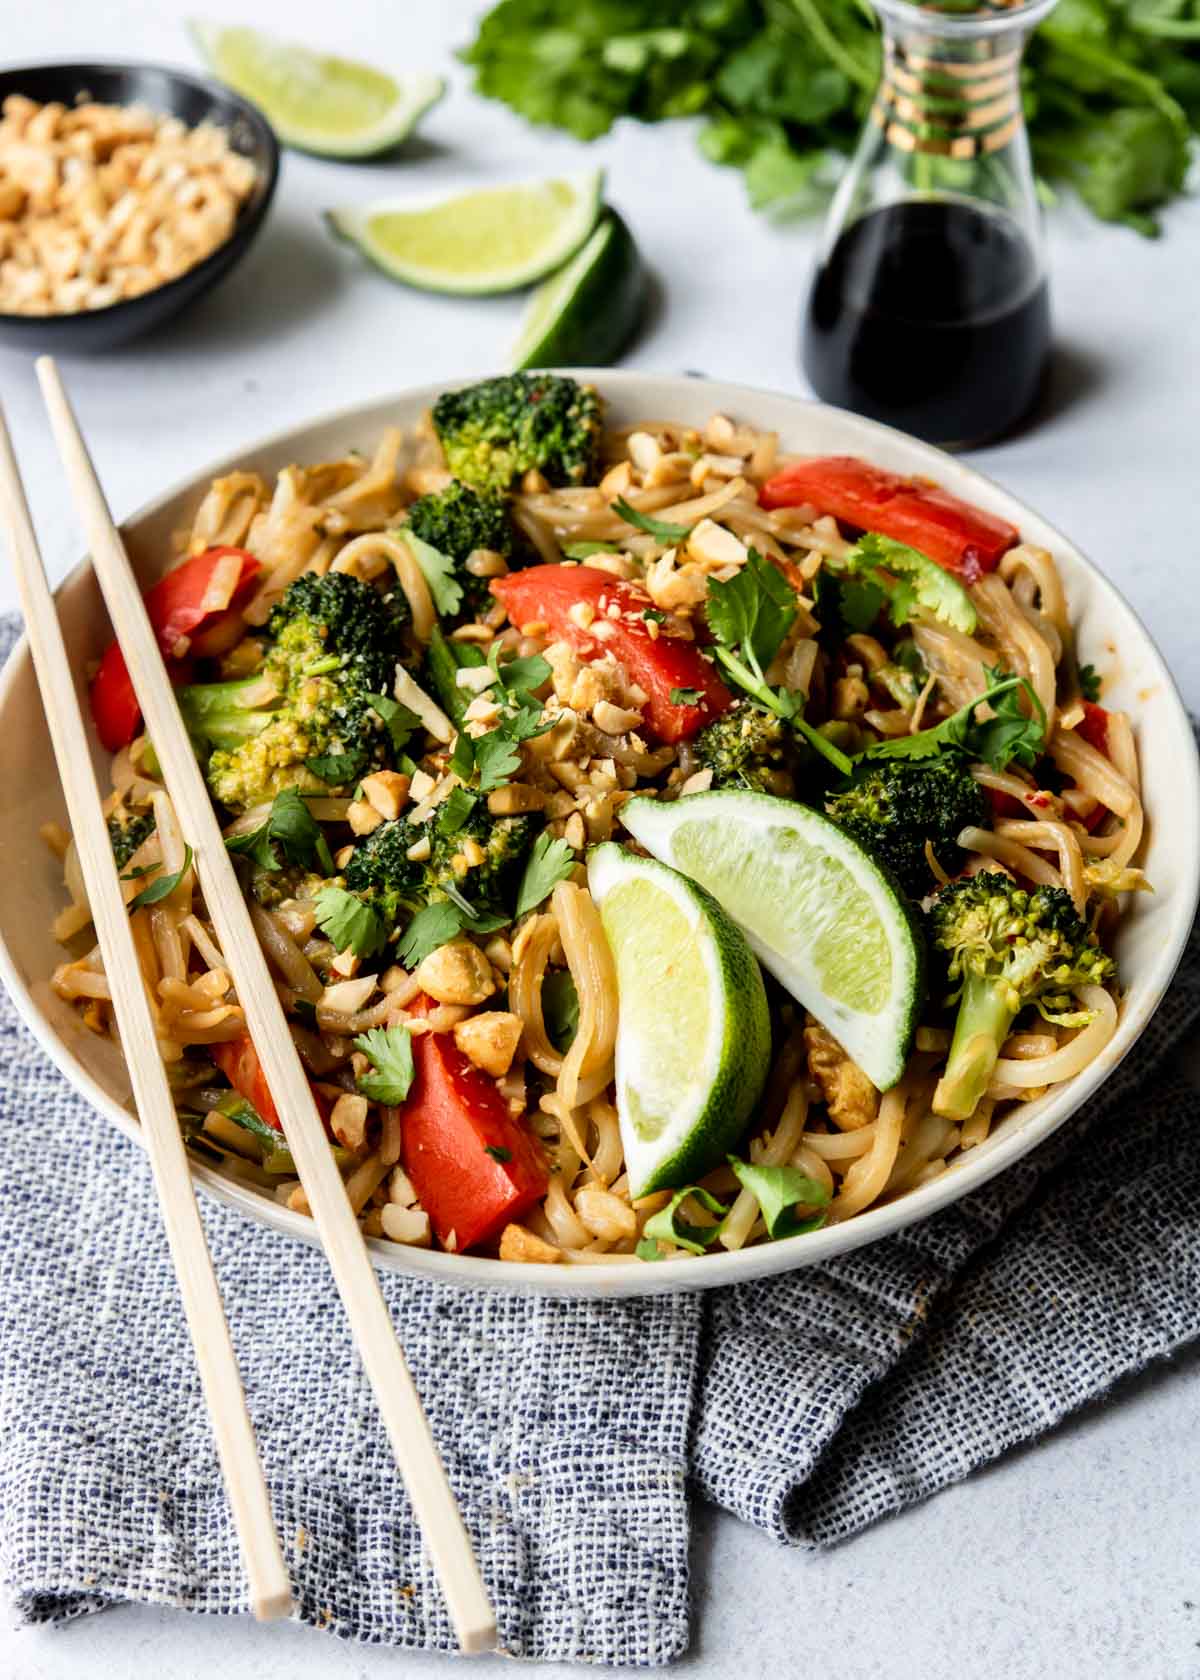 Vegetable Pad Thai in a white bowl with limes and chop sticks